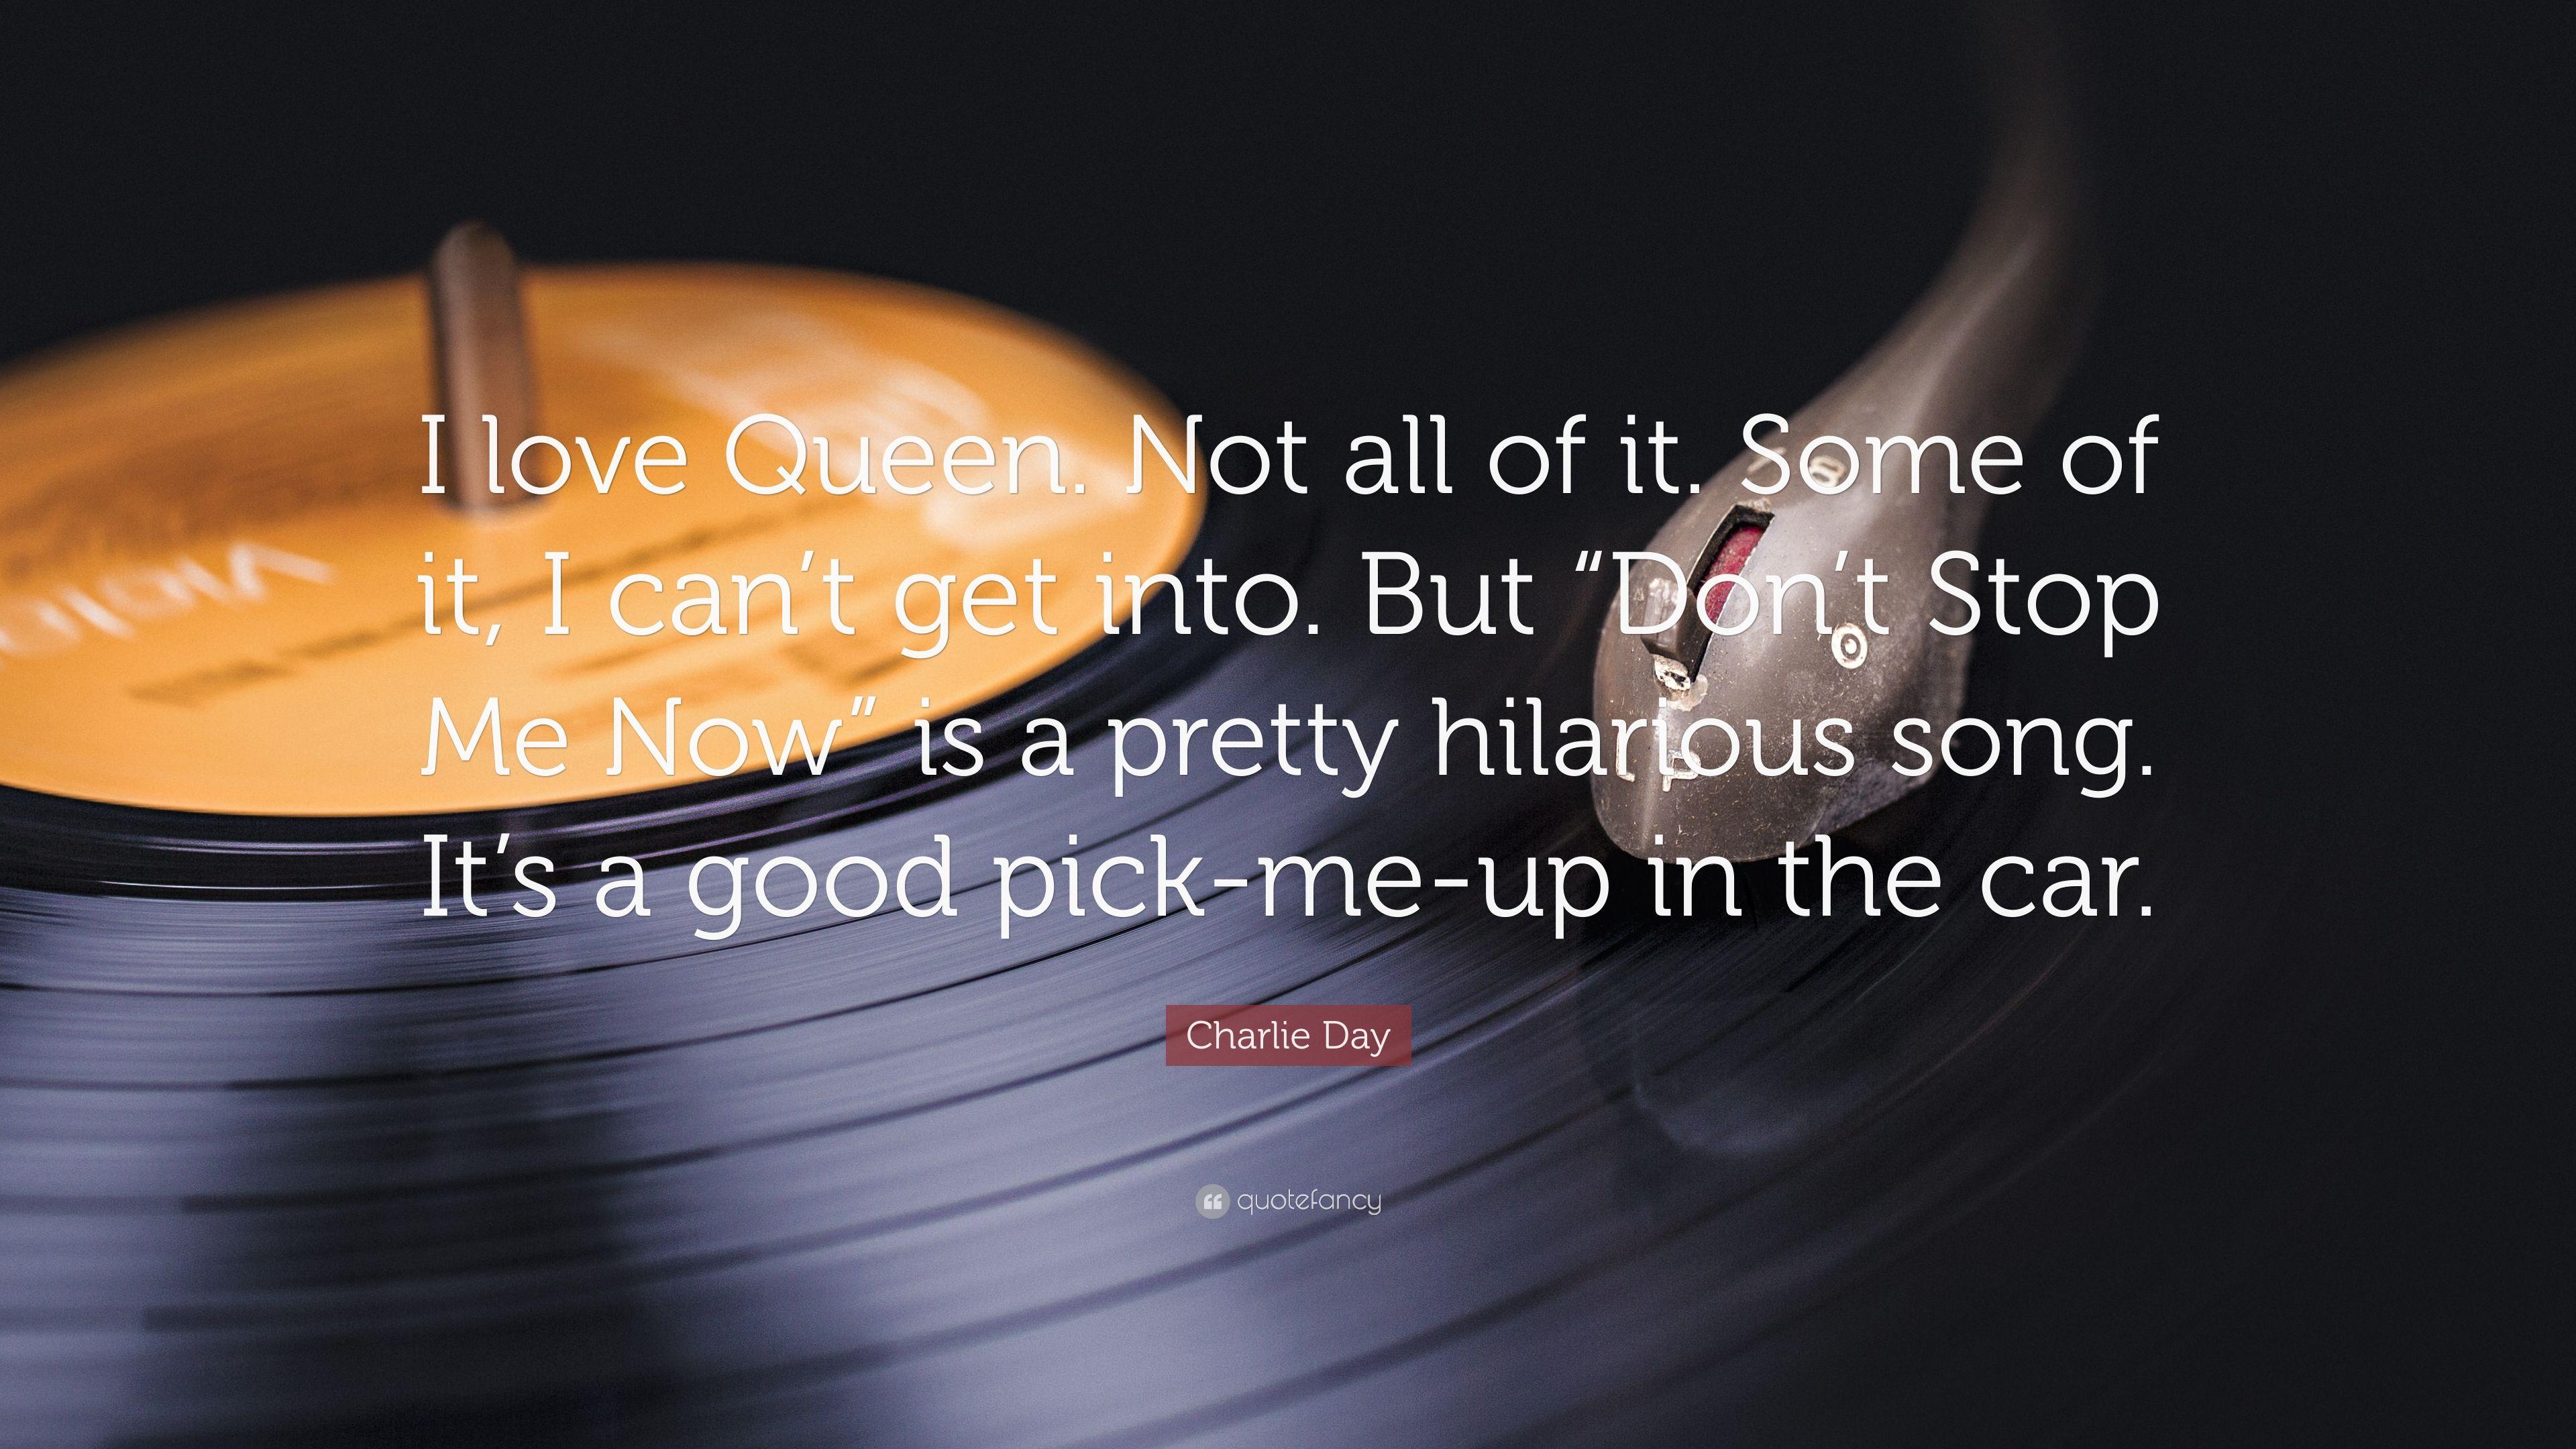 Charlie Day Quote: “I love Queen. Not all of it. Some of it, I can't